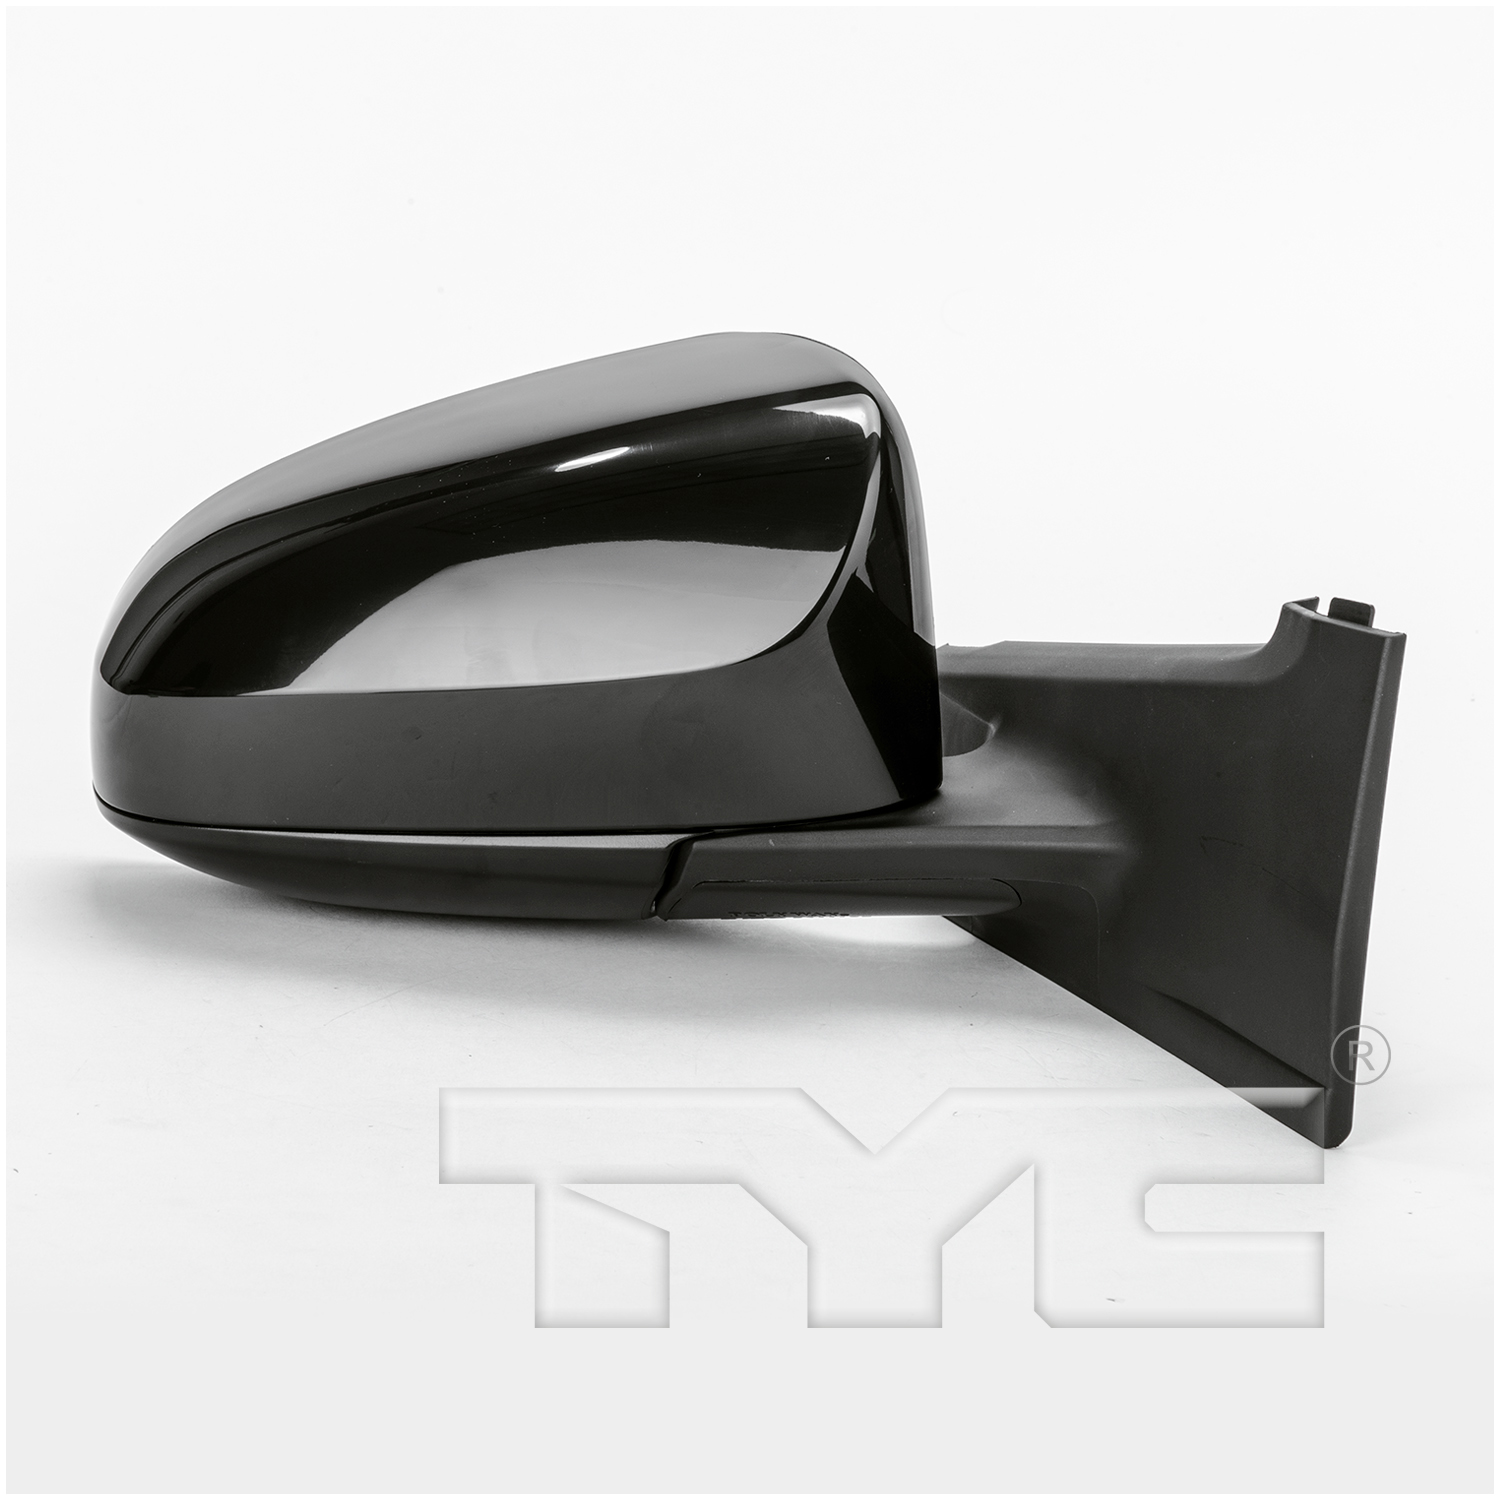 Aftermarket MIRRORS for TOYOTA - YARIS, YARIS,12-12,RT Mirror outside rear view